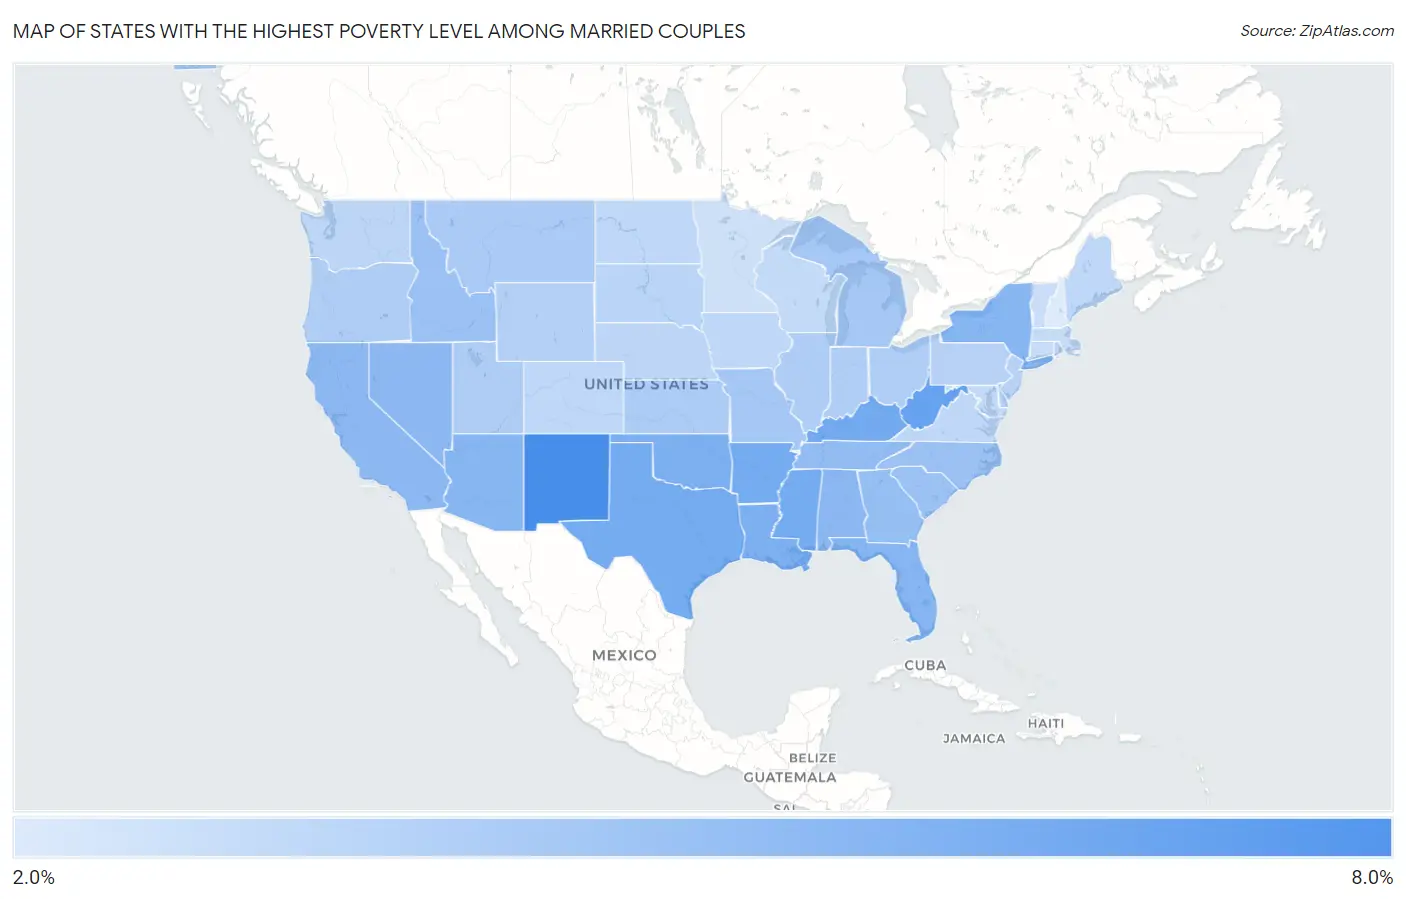 States with the Highest Poverty Level Among Married Couples in the United States Map